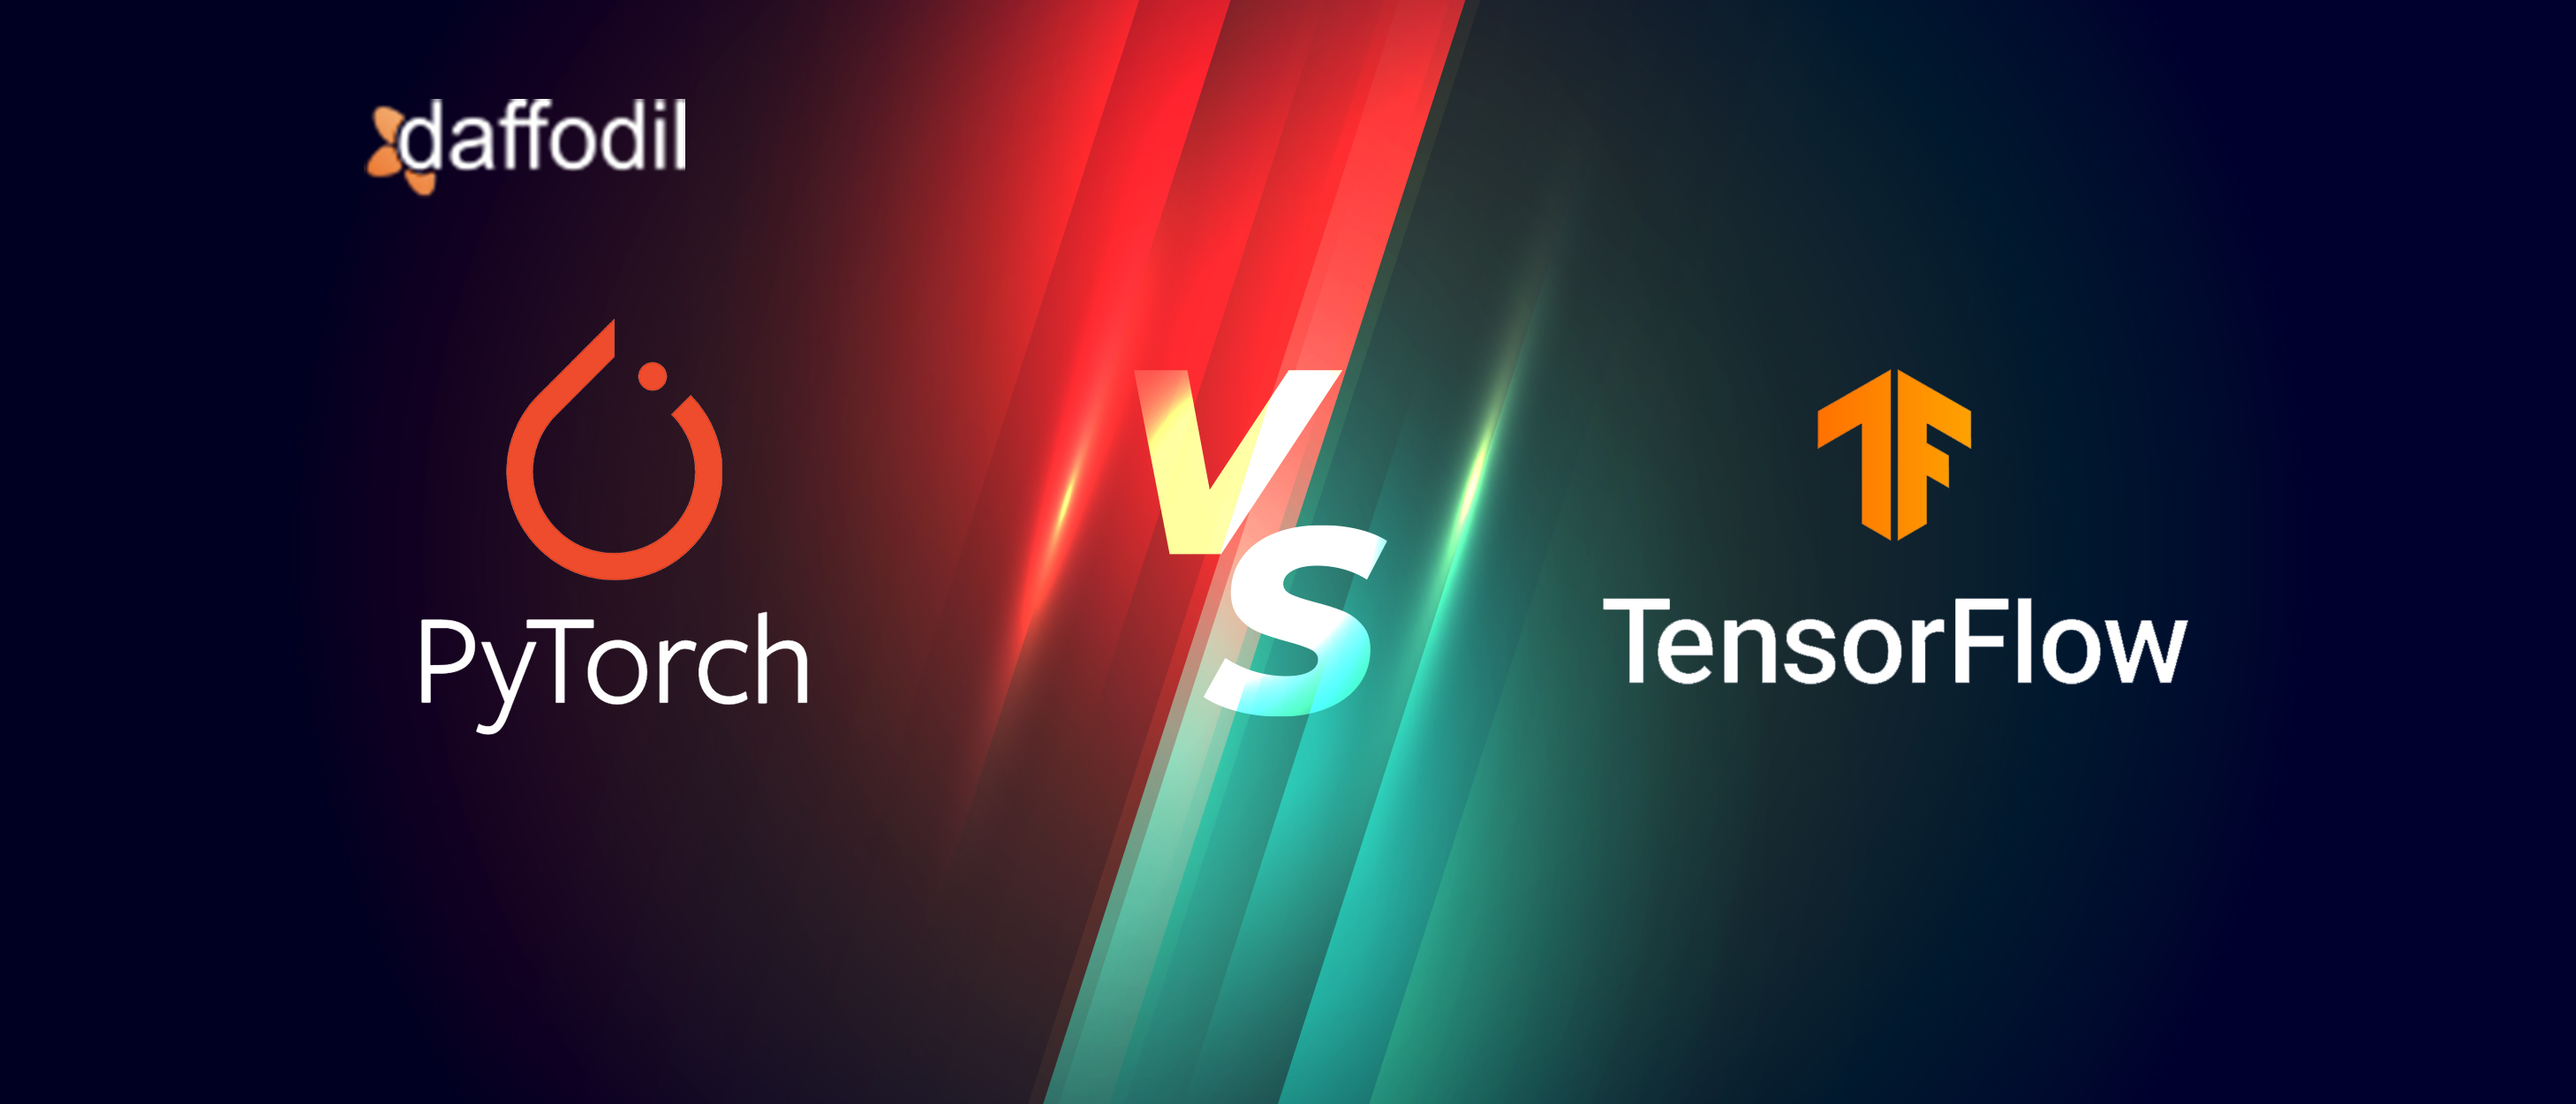 PyTorch vs TensorFlow How To Choose Between These Deep Learning